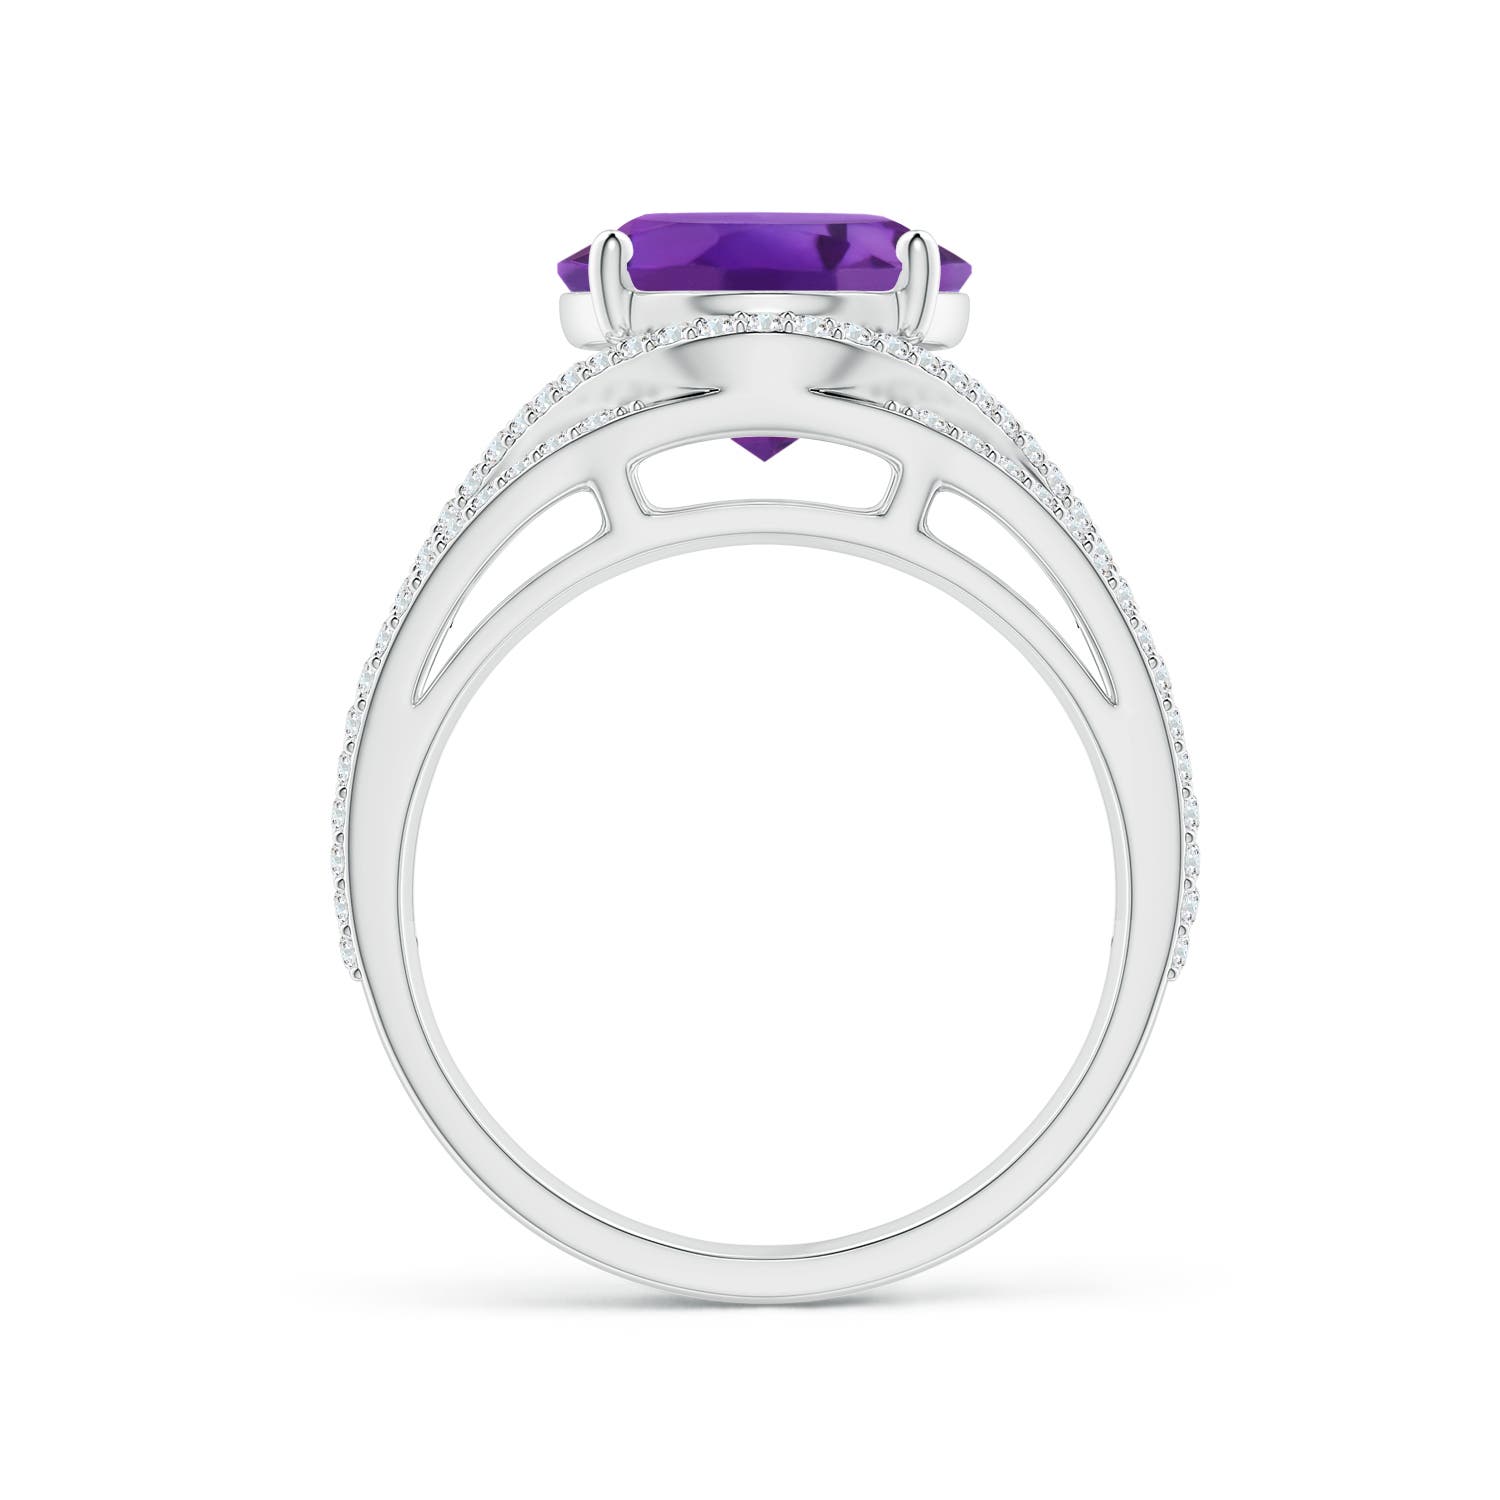 AAA - Amethyst / 4.94 CT / 14 KT White Gold